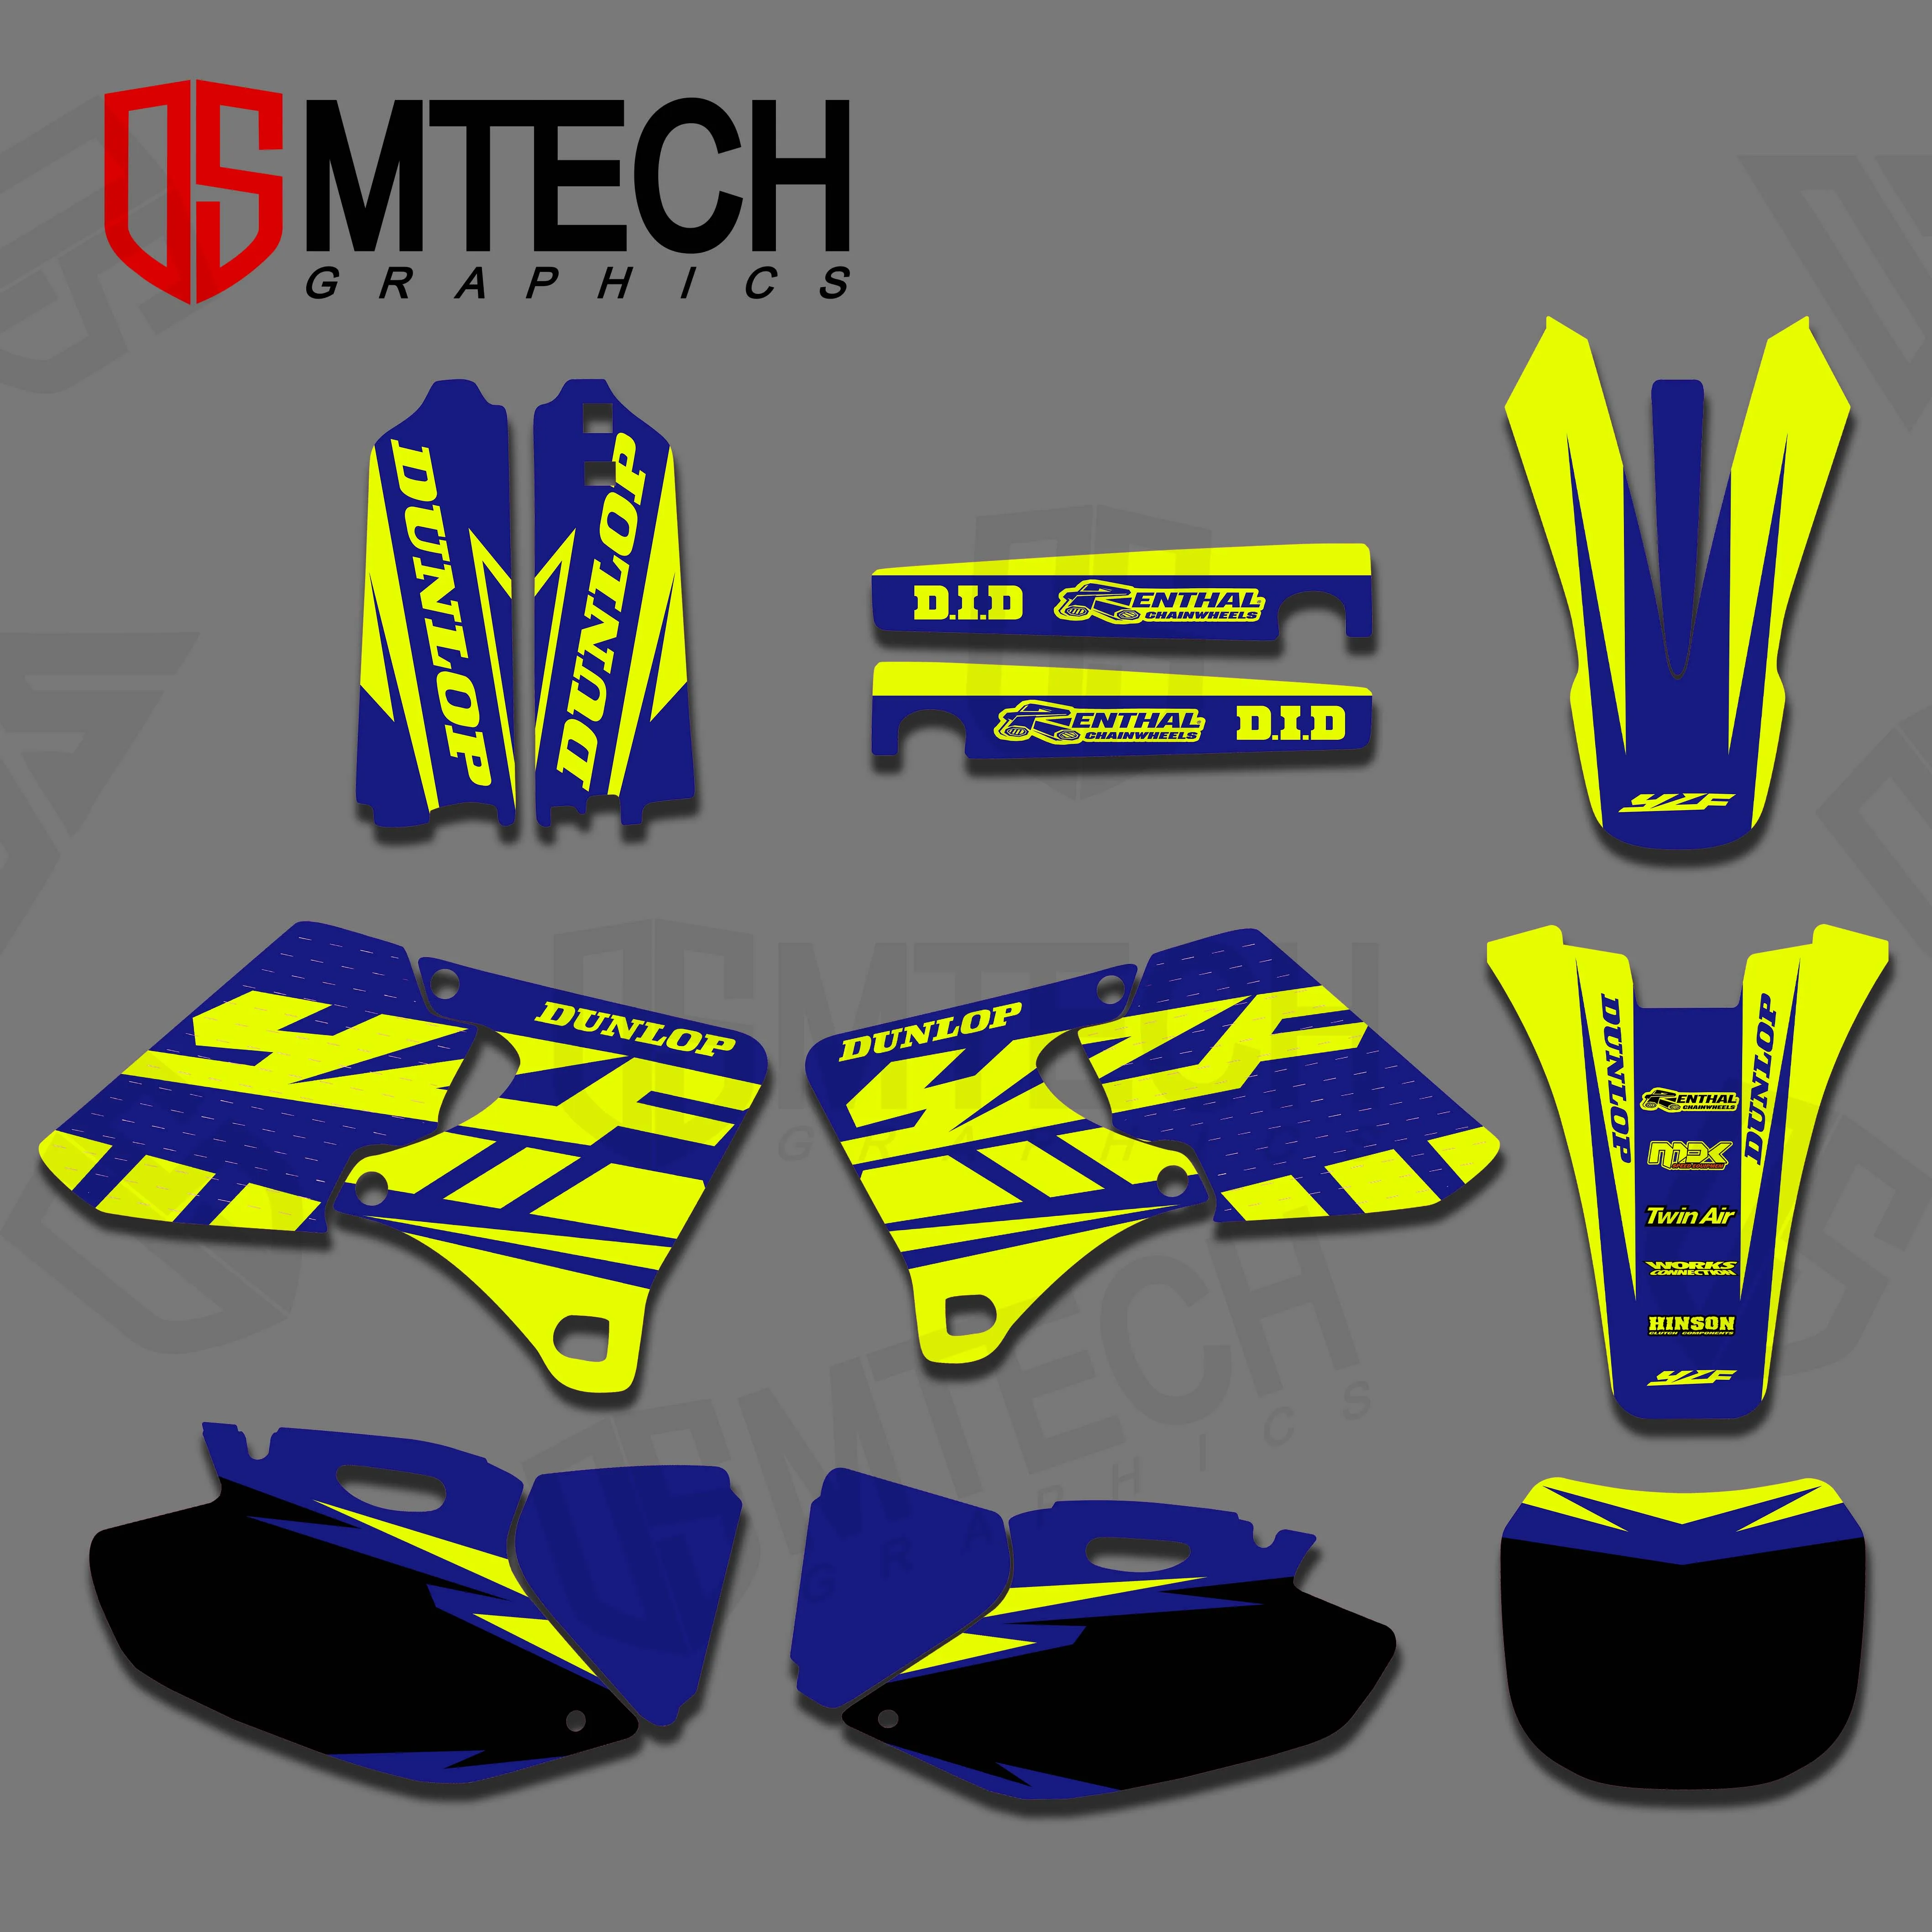 DSMTECH GRAPHICS & BACKGROUNDS DECALS STICKERS Kits for Yamaha YZ250F YZ400F YZ426F YZF 250F 400F 426F 1998 1999 2000 2001 2002 hlmt motorcycle new style team graphics backgrounds decals stickers kits for yamaha yz125 yz250 1996 2001 yz125 yz250